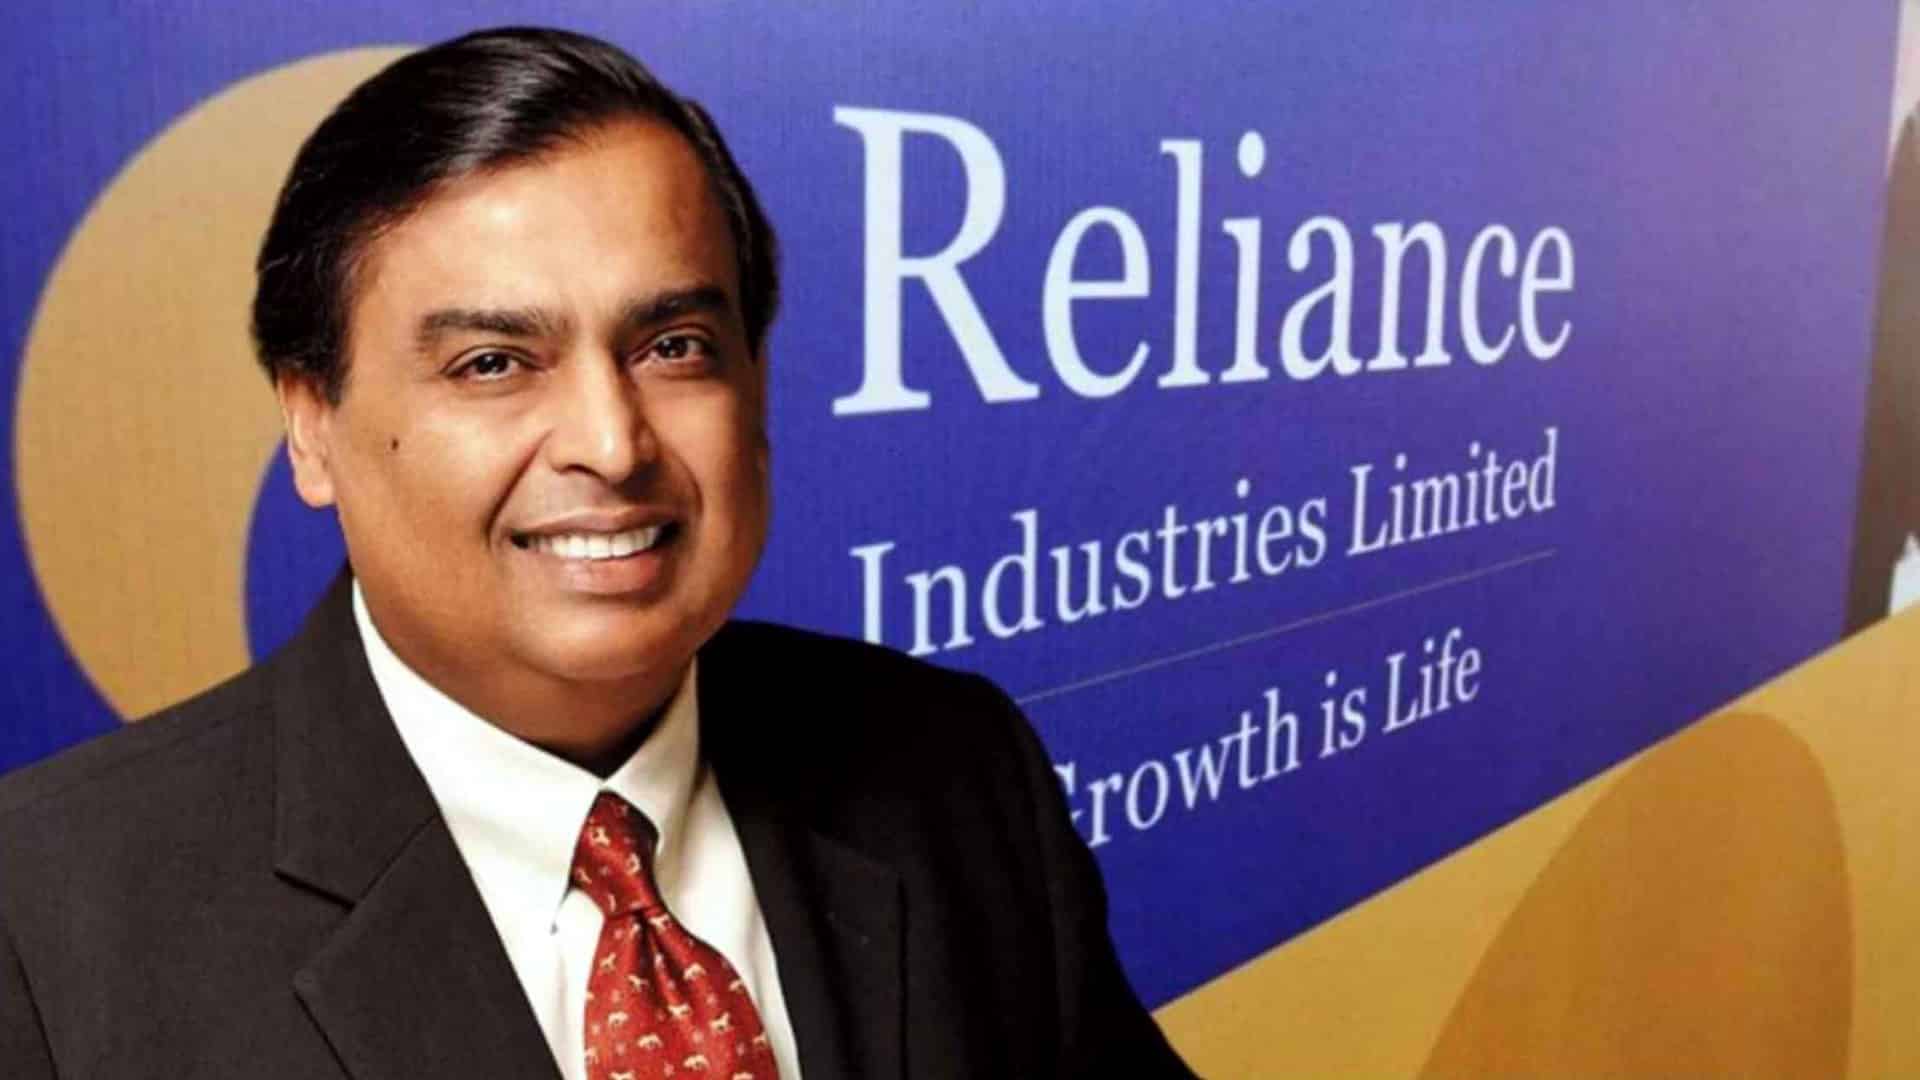 Reliance to invest Rs 75,000 crore in UP in 4 yrs: Ambani